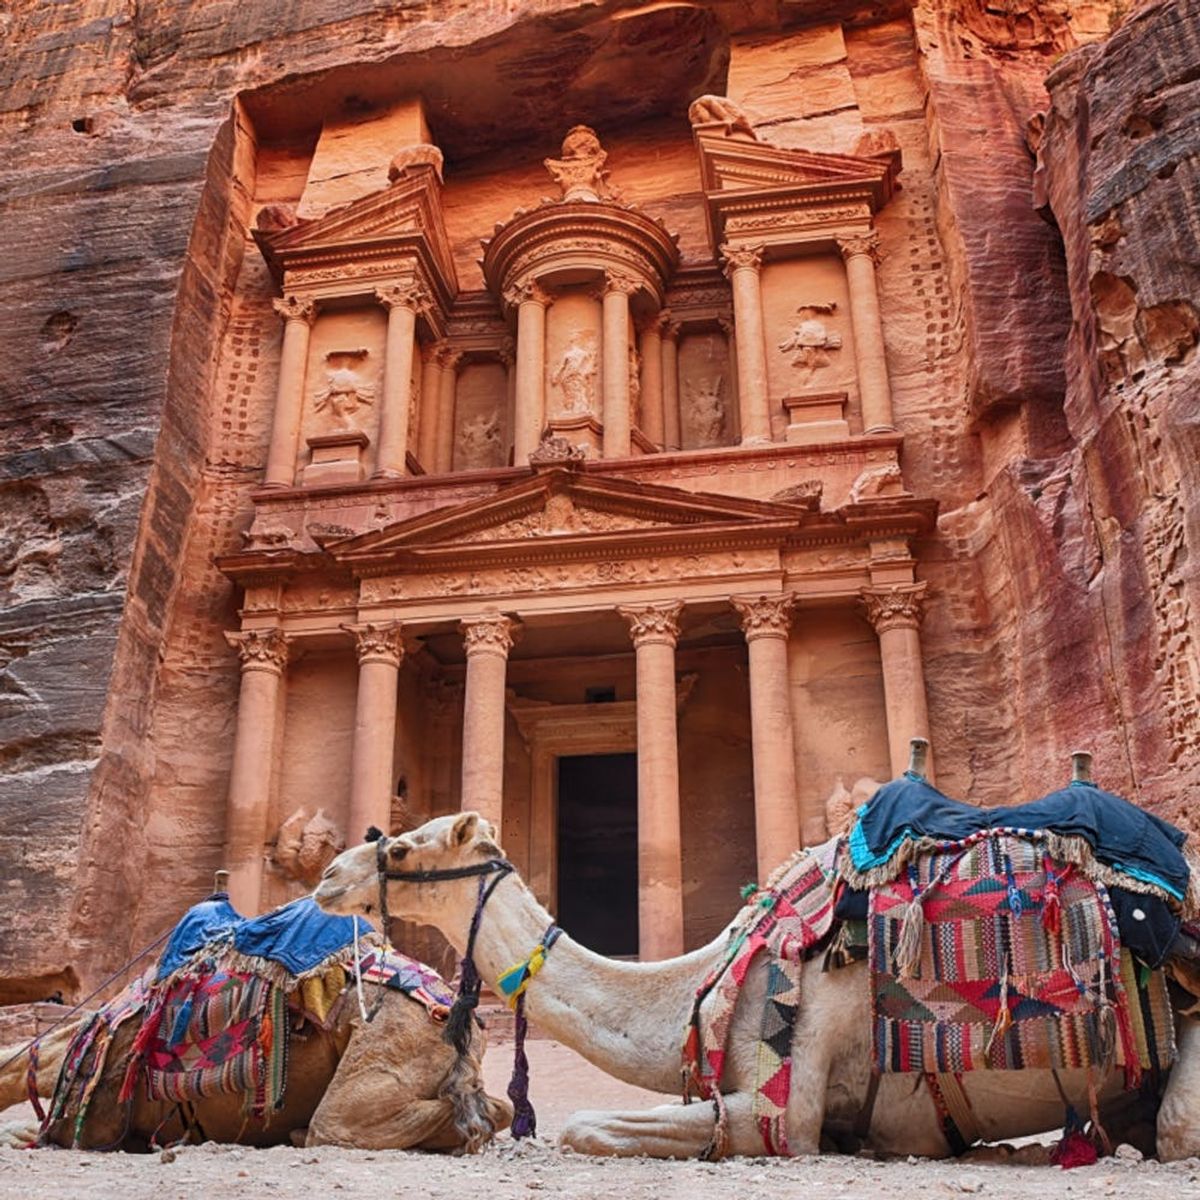 Discover Why This Middle Eastern Country Is a Holiday Favorite for the Royal Family